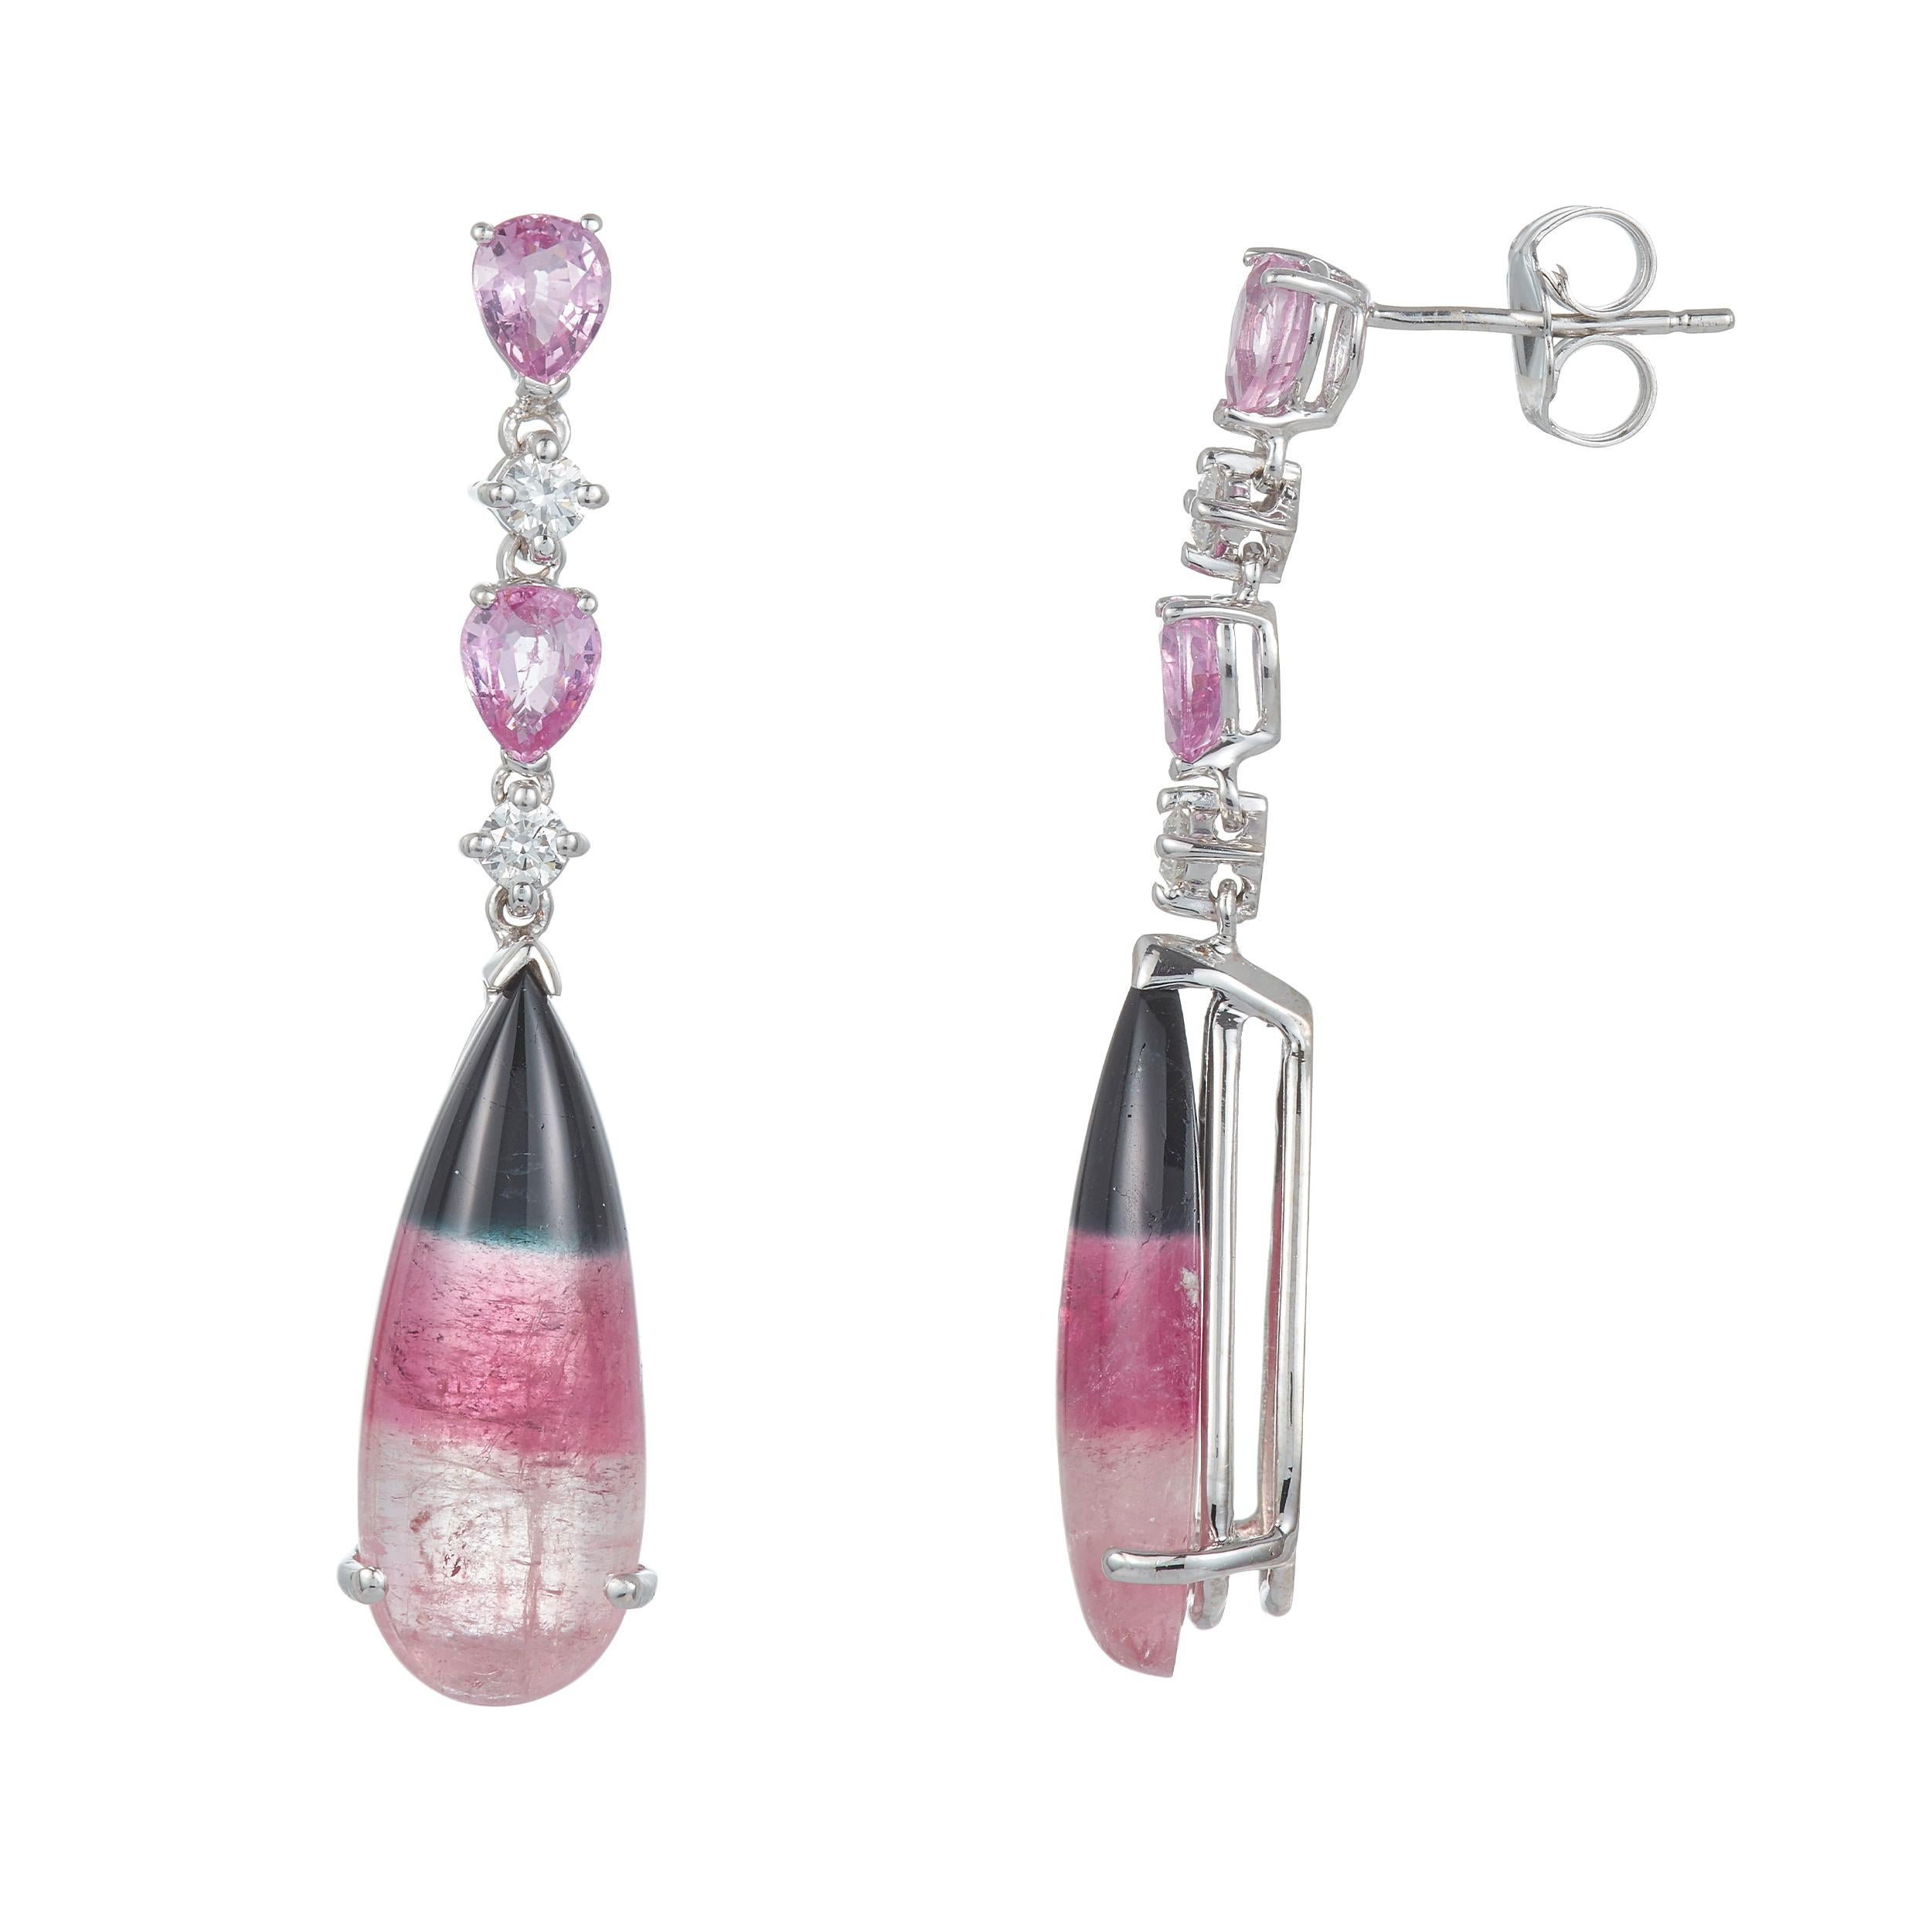 Stones: 2 Pear Shape Tourmaline 12.46 Carats Total Weight
Accent Stones: 4 Pear Shape Pink Sapphire 1.68 Carats Total Weight
Accent Stones: 4 Round Brillant Diamonds at 0.65 Carats Total Weight - Color- SI/ Clarity: H-I
Metal: 14K White Gold

Fine